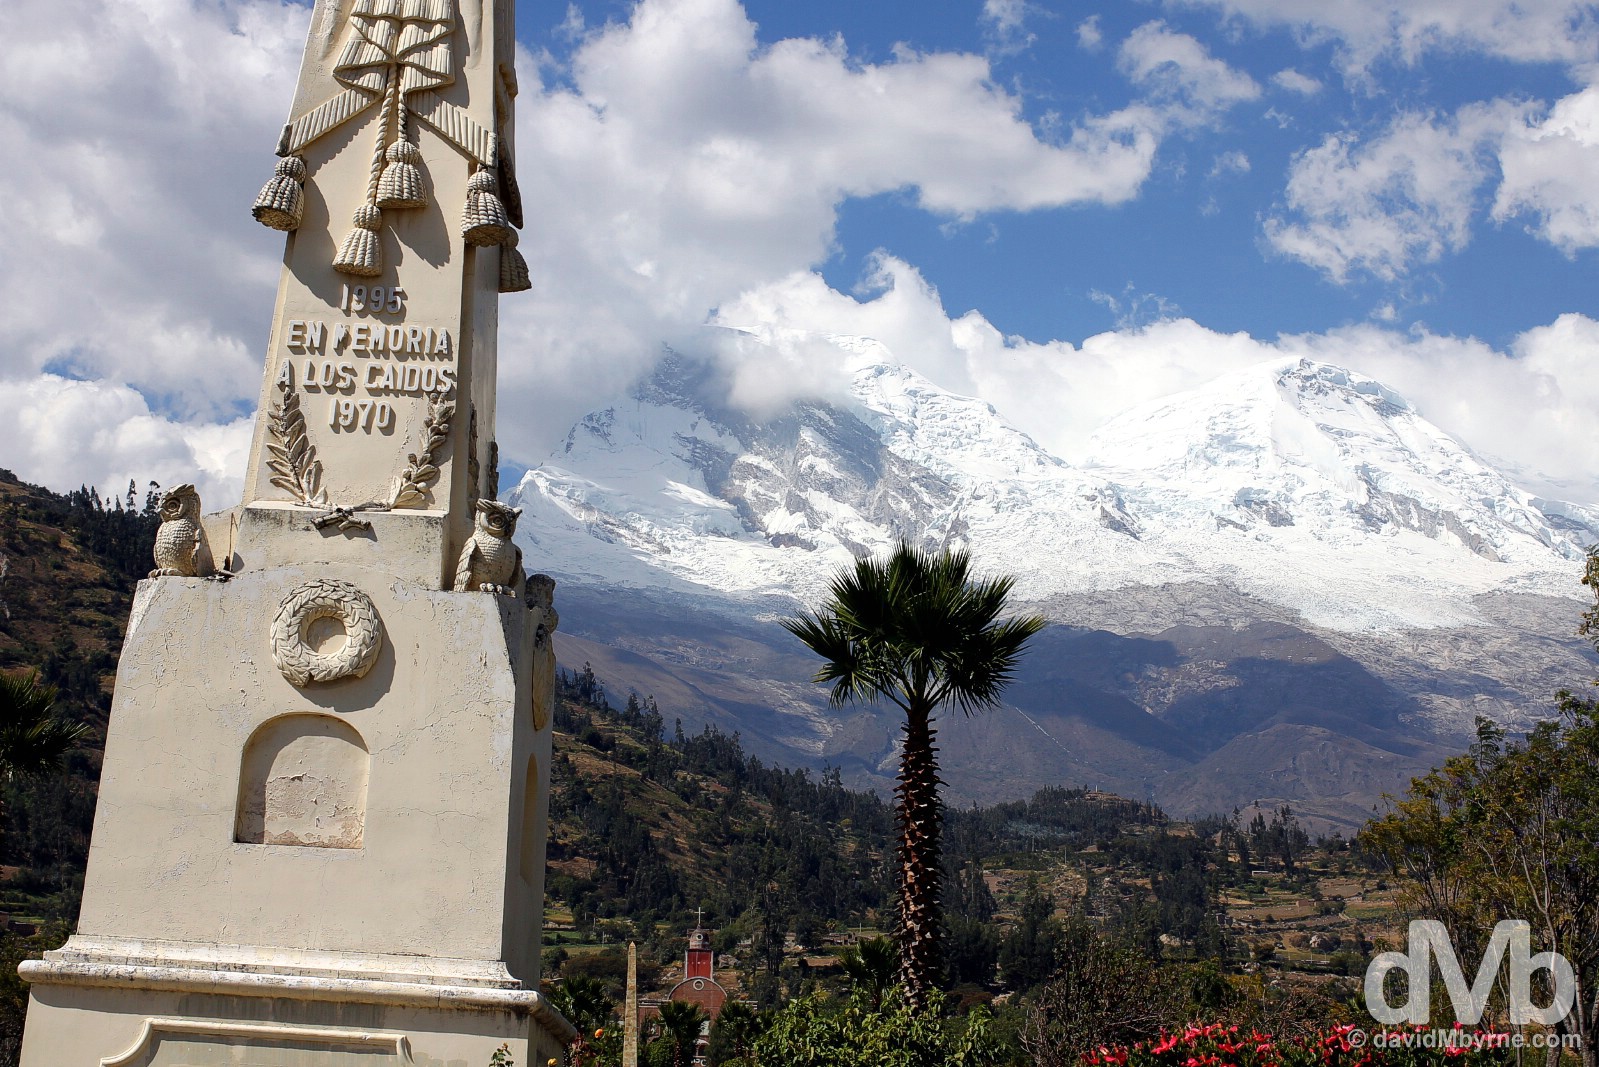 A memorial obelisk to the 1970 Ancash Earthquake & Landslide at the site of the submerged old town of Yungay, Ancash, Peru. August 5, 2015. 